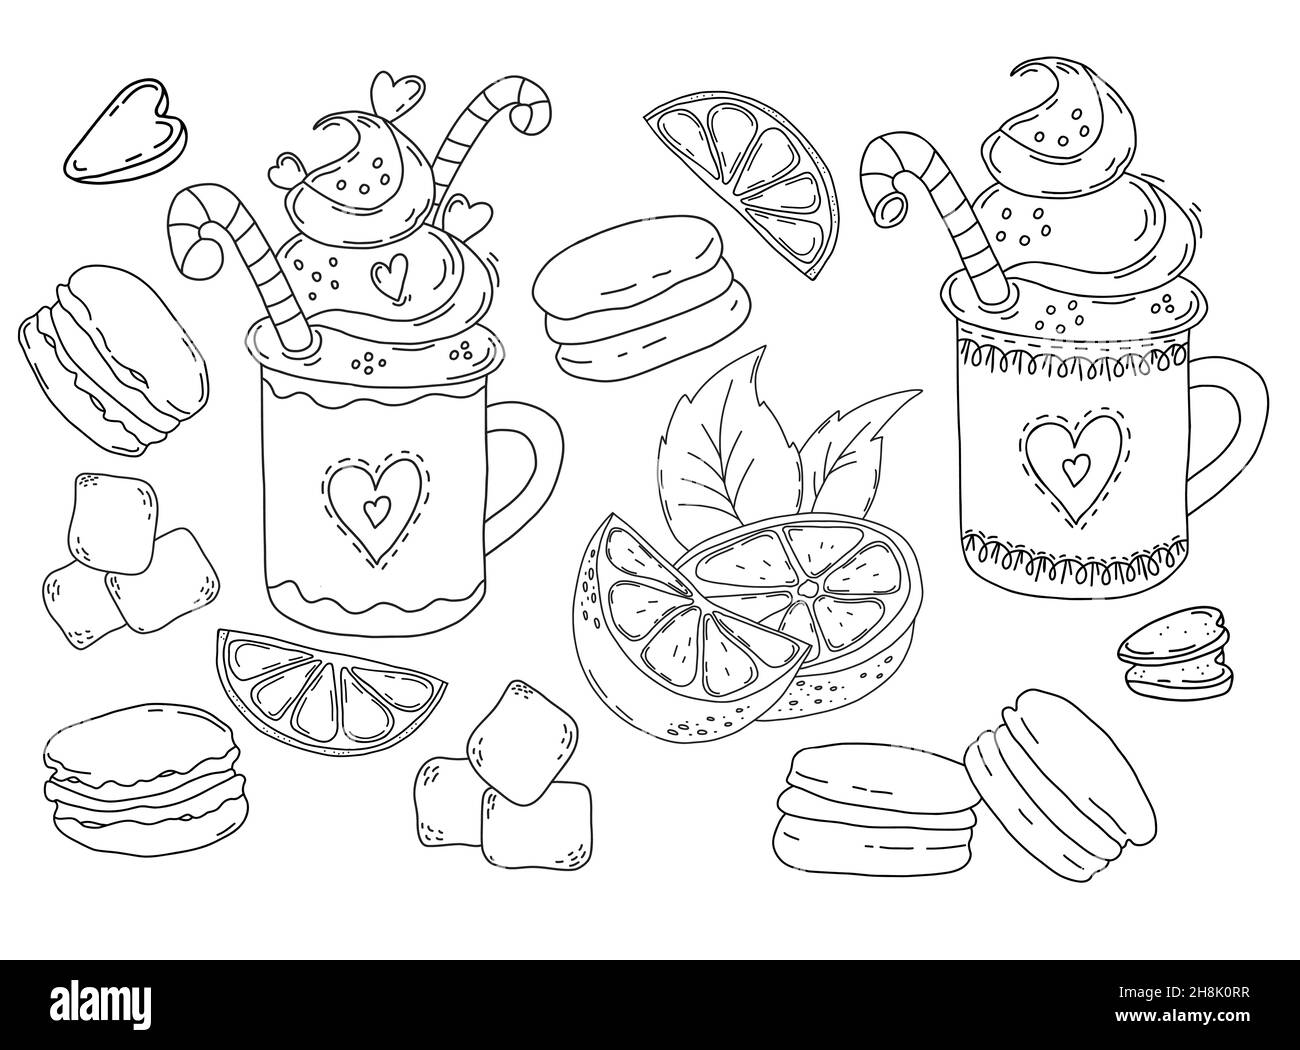 Collection of desserts in style of hand-drawn linear doodles. Cup with cream dessert and straw, Macaroon biscuits, refined sugar and lemon citrus wedg Stock Vector